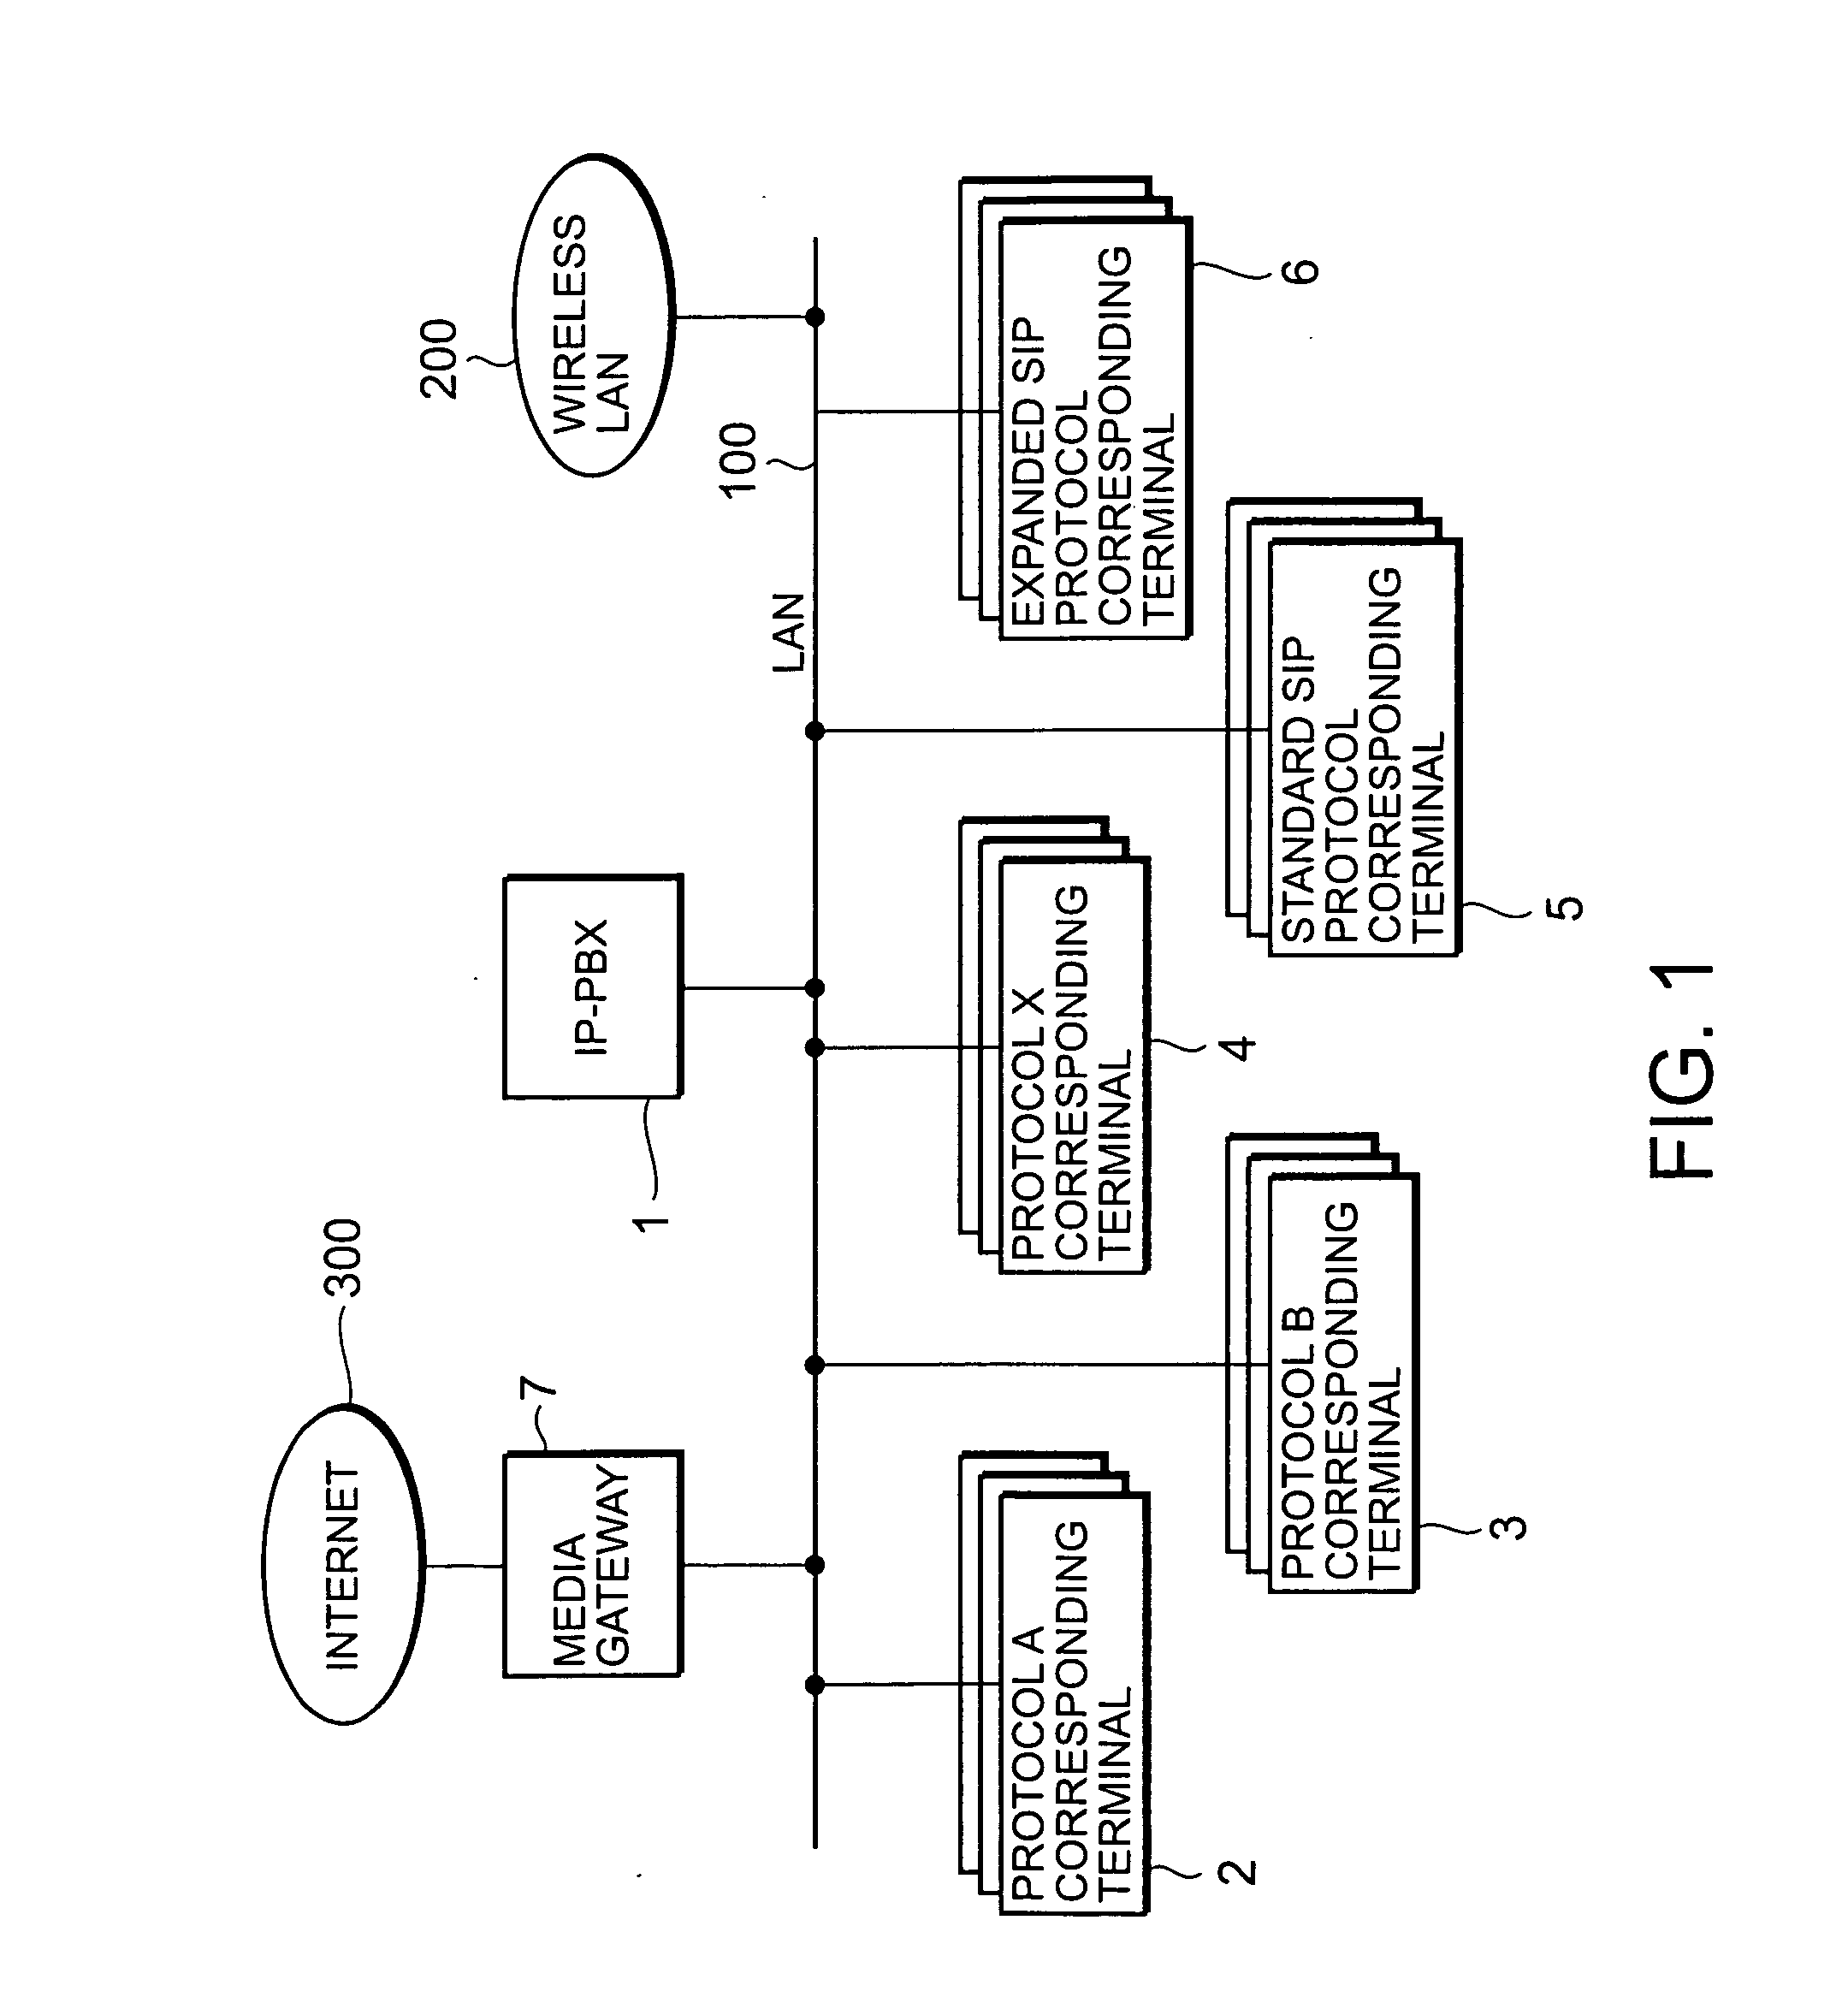 Network, private branch exchange, and PBX additional service starting method